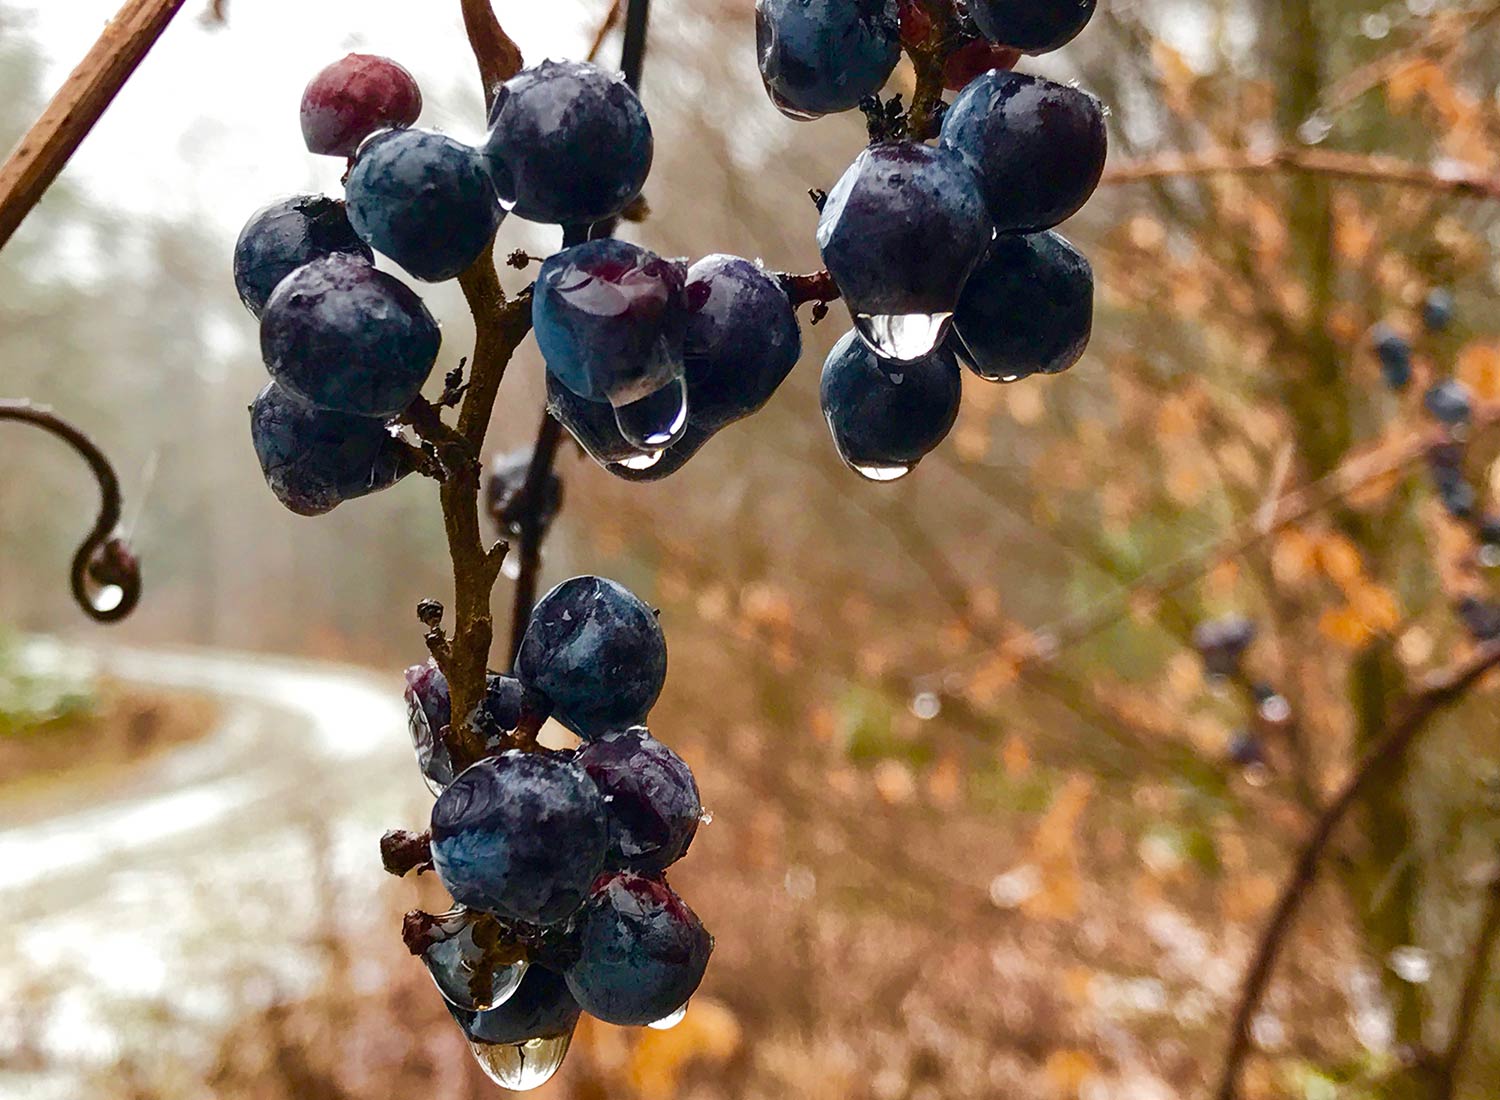 SHO Farm: vegan wild farming in a cold climate | wild grapes along our driveway